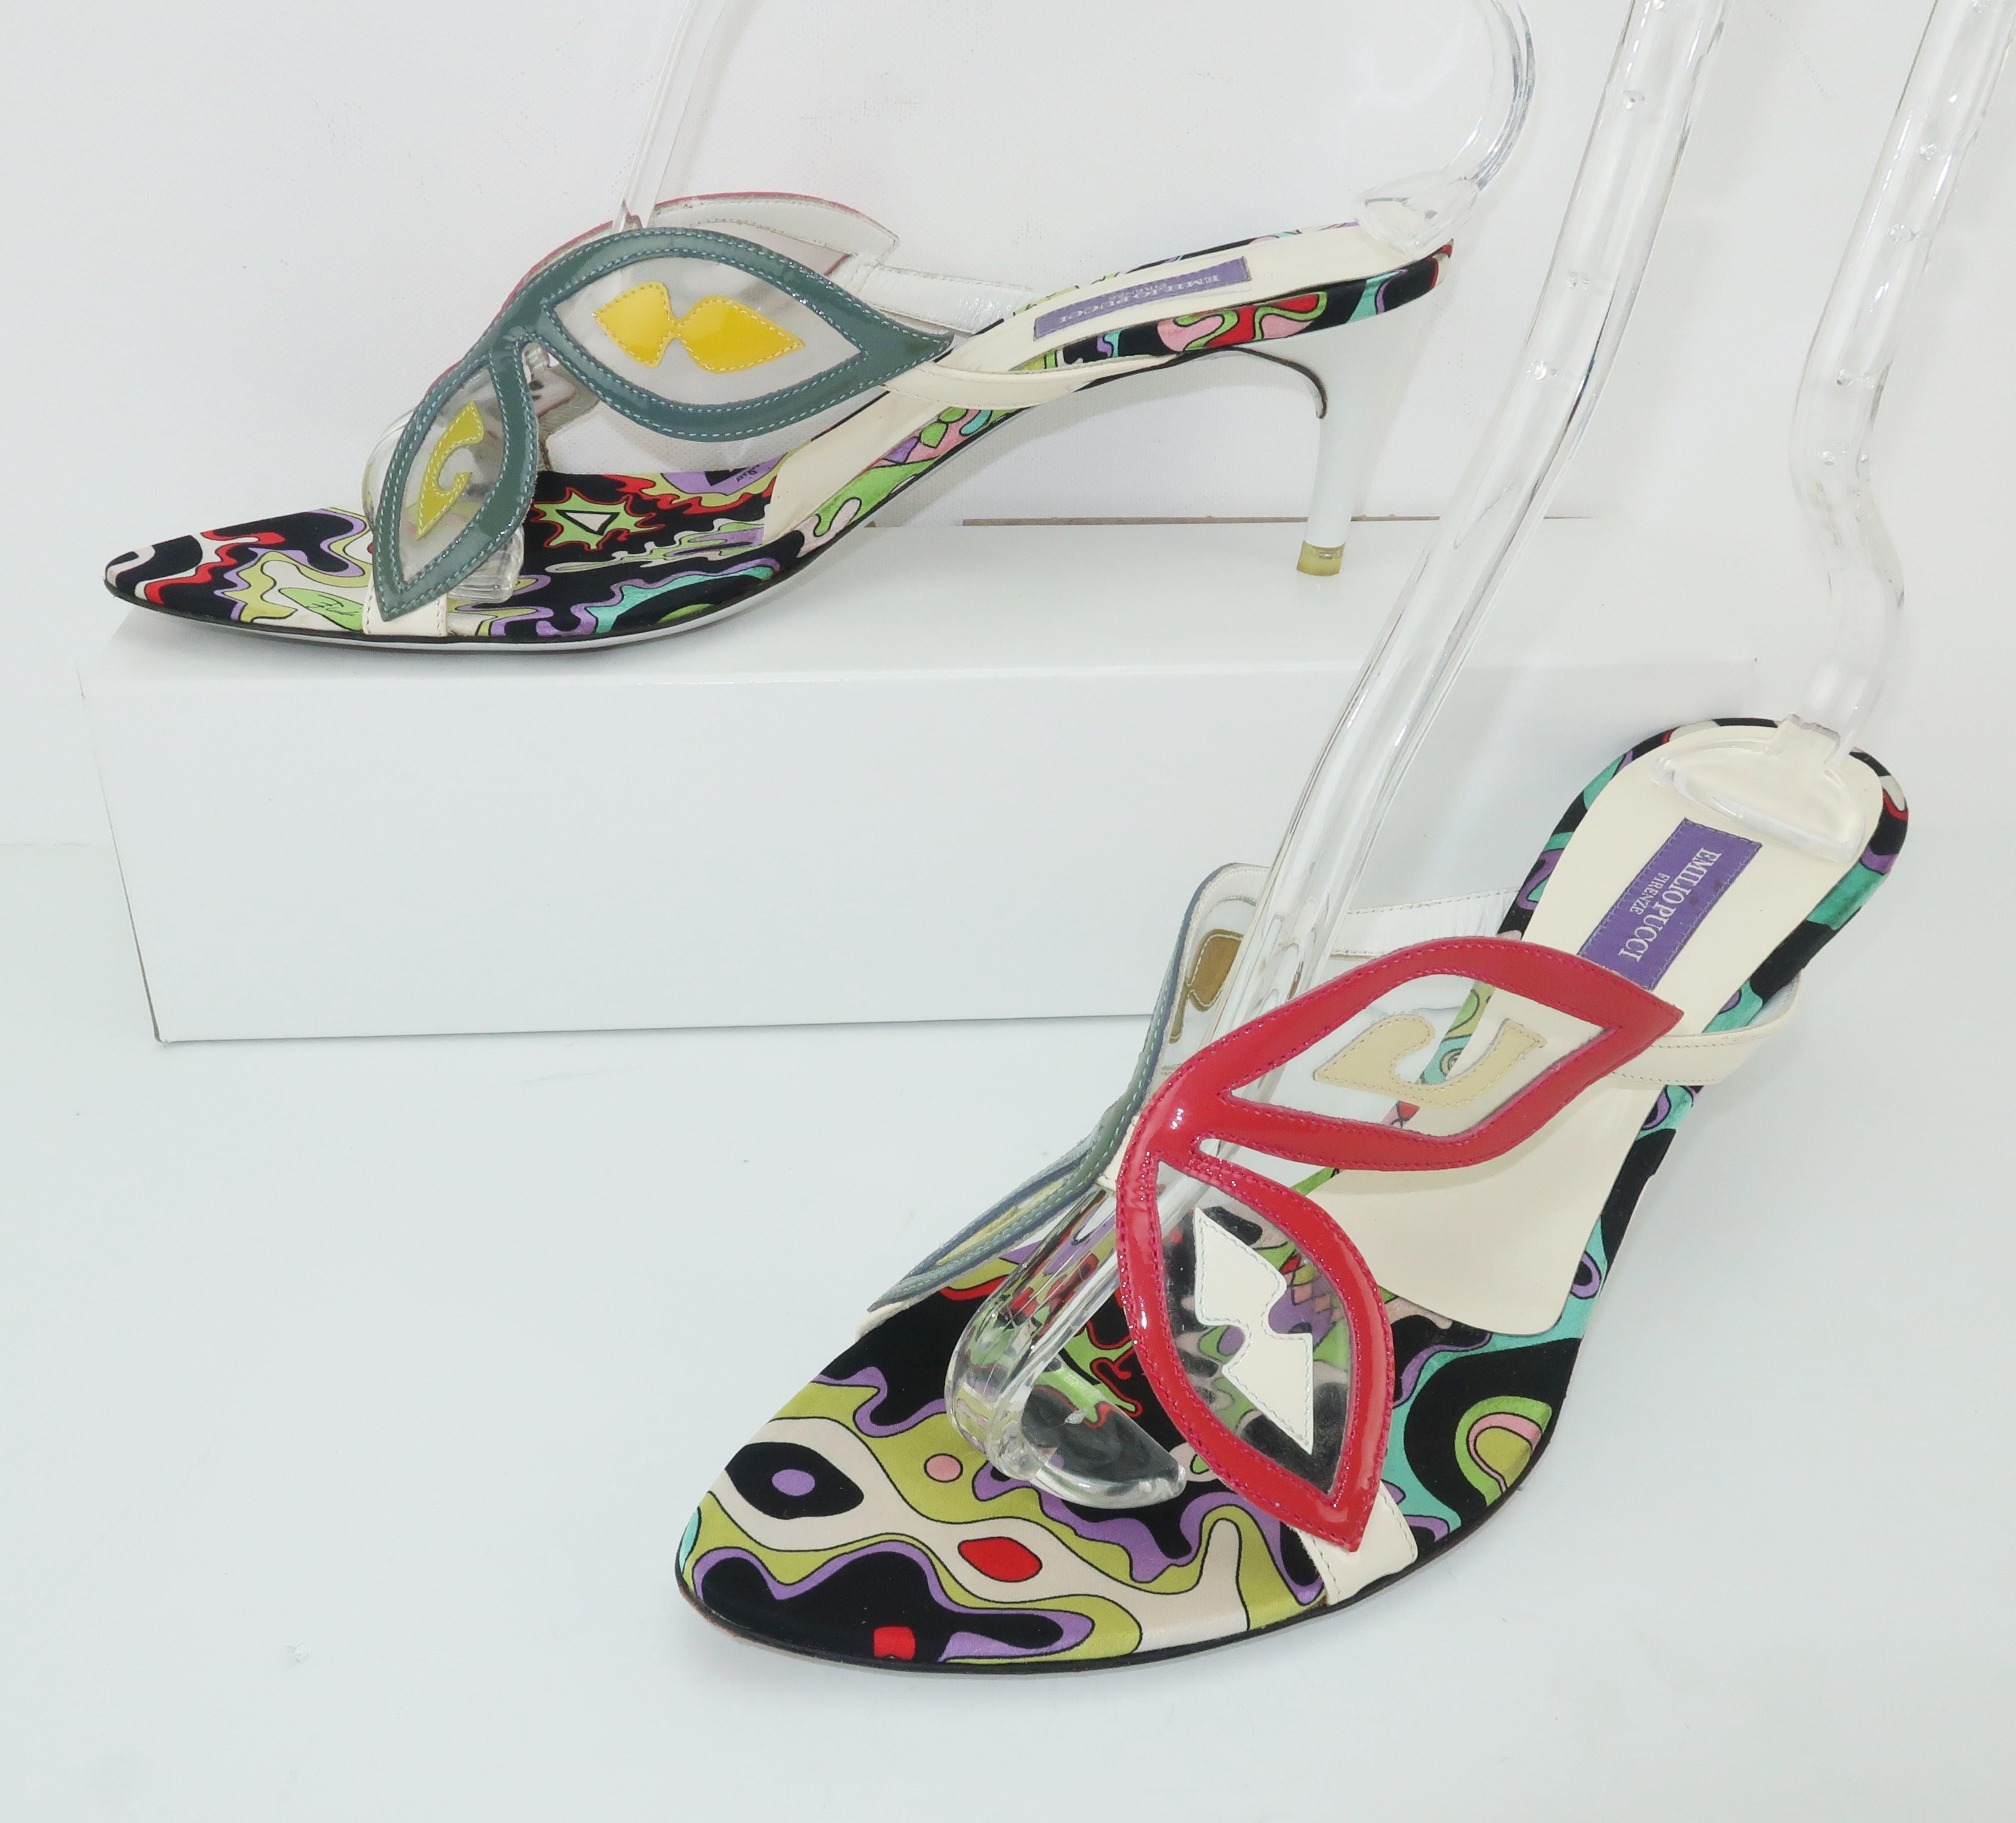 These Pucci mules are more fun than you can shake a butterfly net at!  The white heeled slide-on sandals are fabricated from clear PVC panels outlined in red, khaki and white patent leathers accented with yellow, creme, white and chartreuse shapes